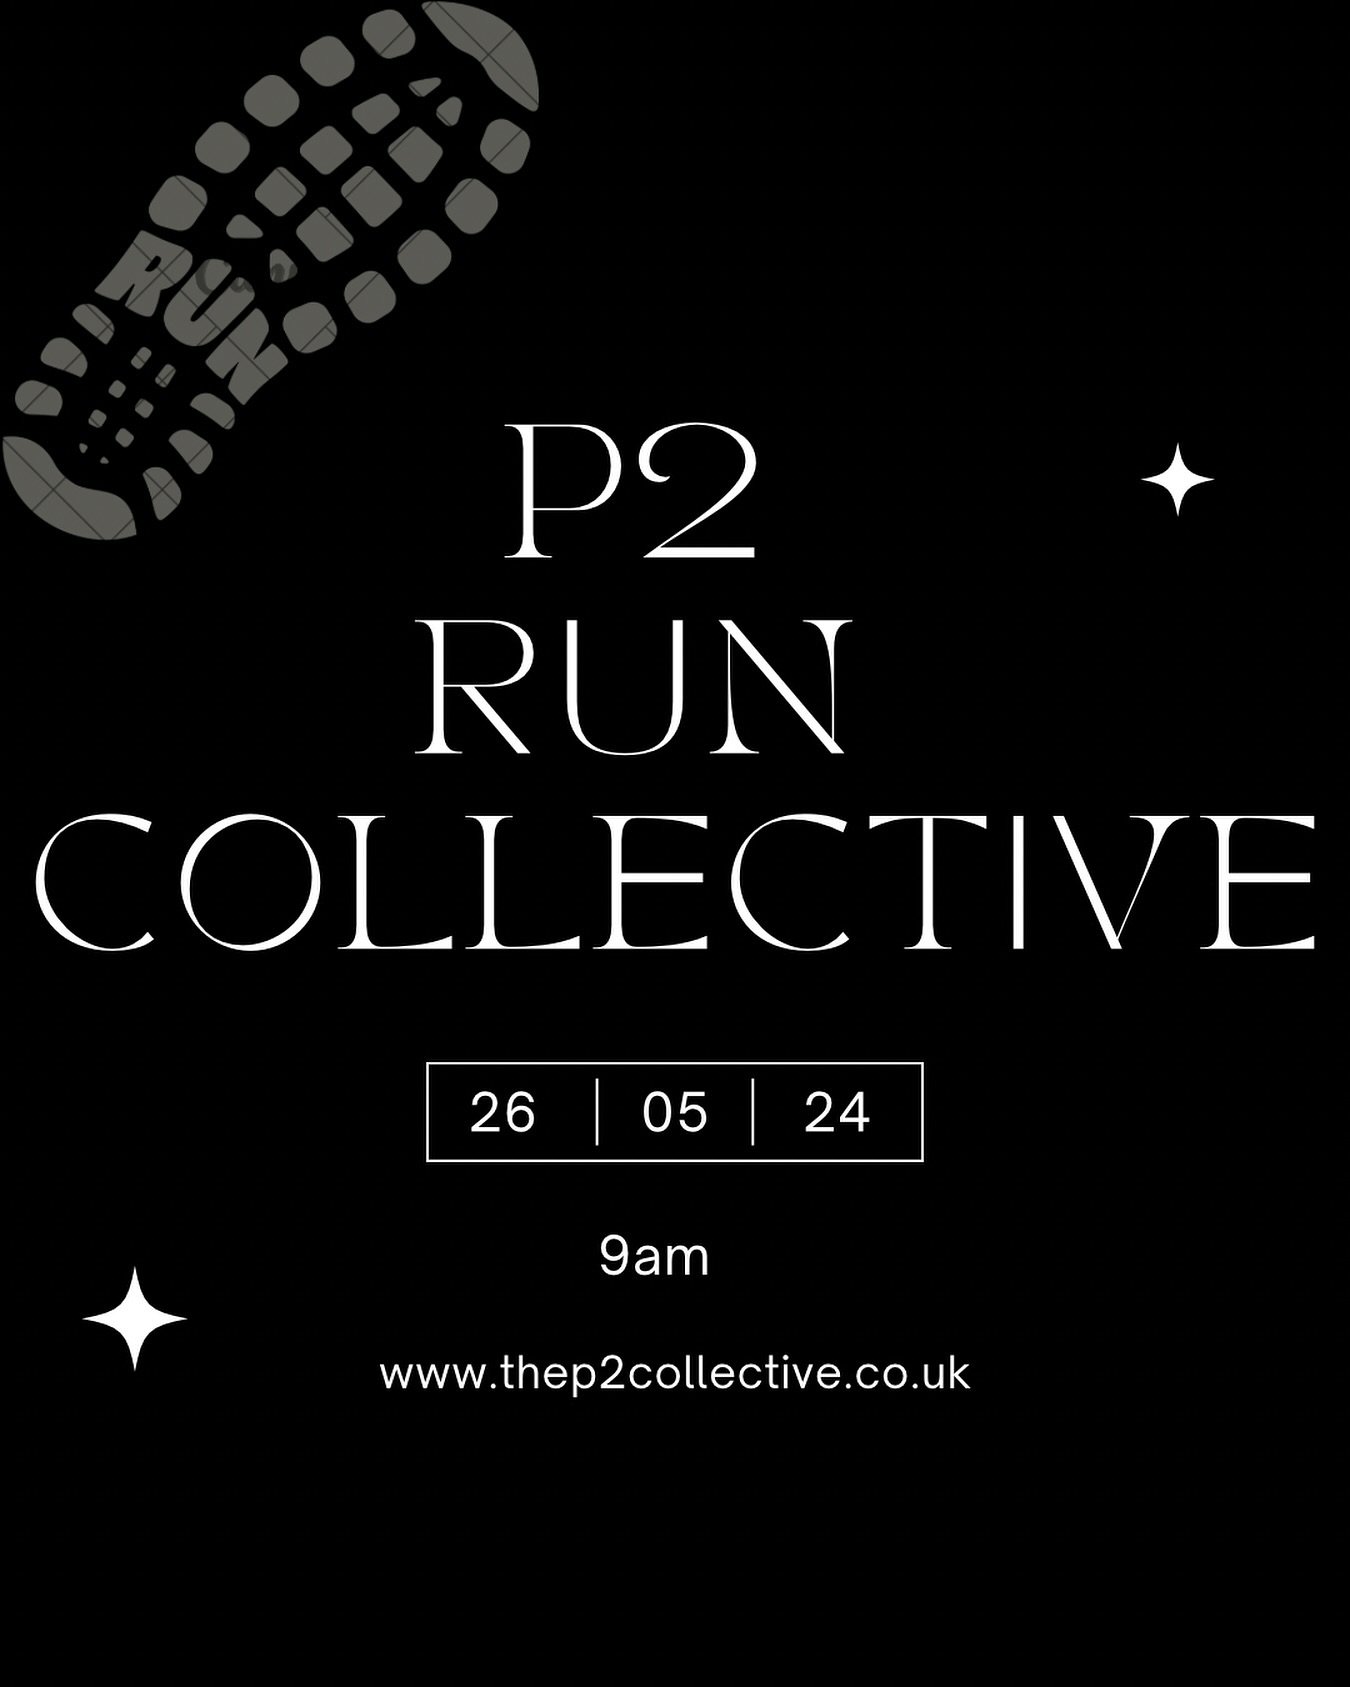 🏃&zwj;♂️ Join us for our next P2 run on May 26th! 📅 We&rsquo;ll meet at the shop at 9am for a relaxed and inclusive run. 
Don&rsquo;t worry about pace or experience &ndash; we welcome all abilities.
It&rsquo;s more about enjoying the company, the s